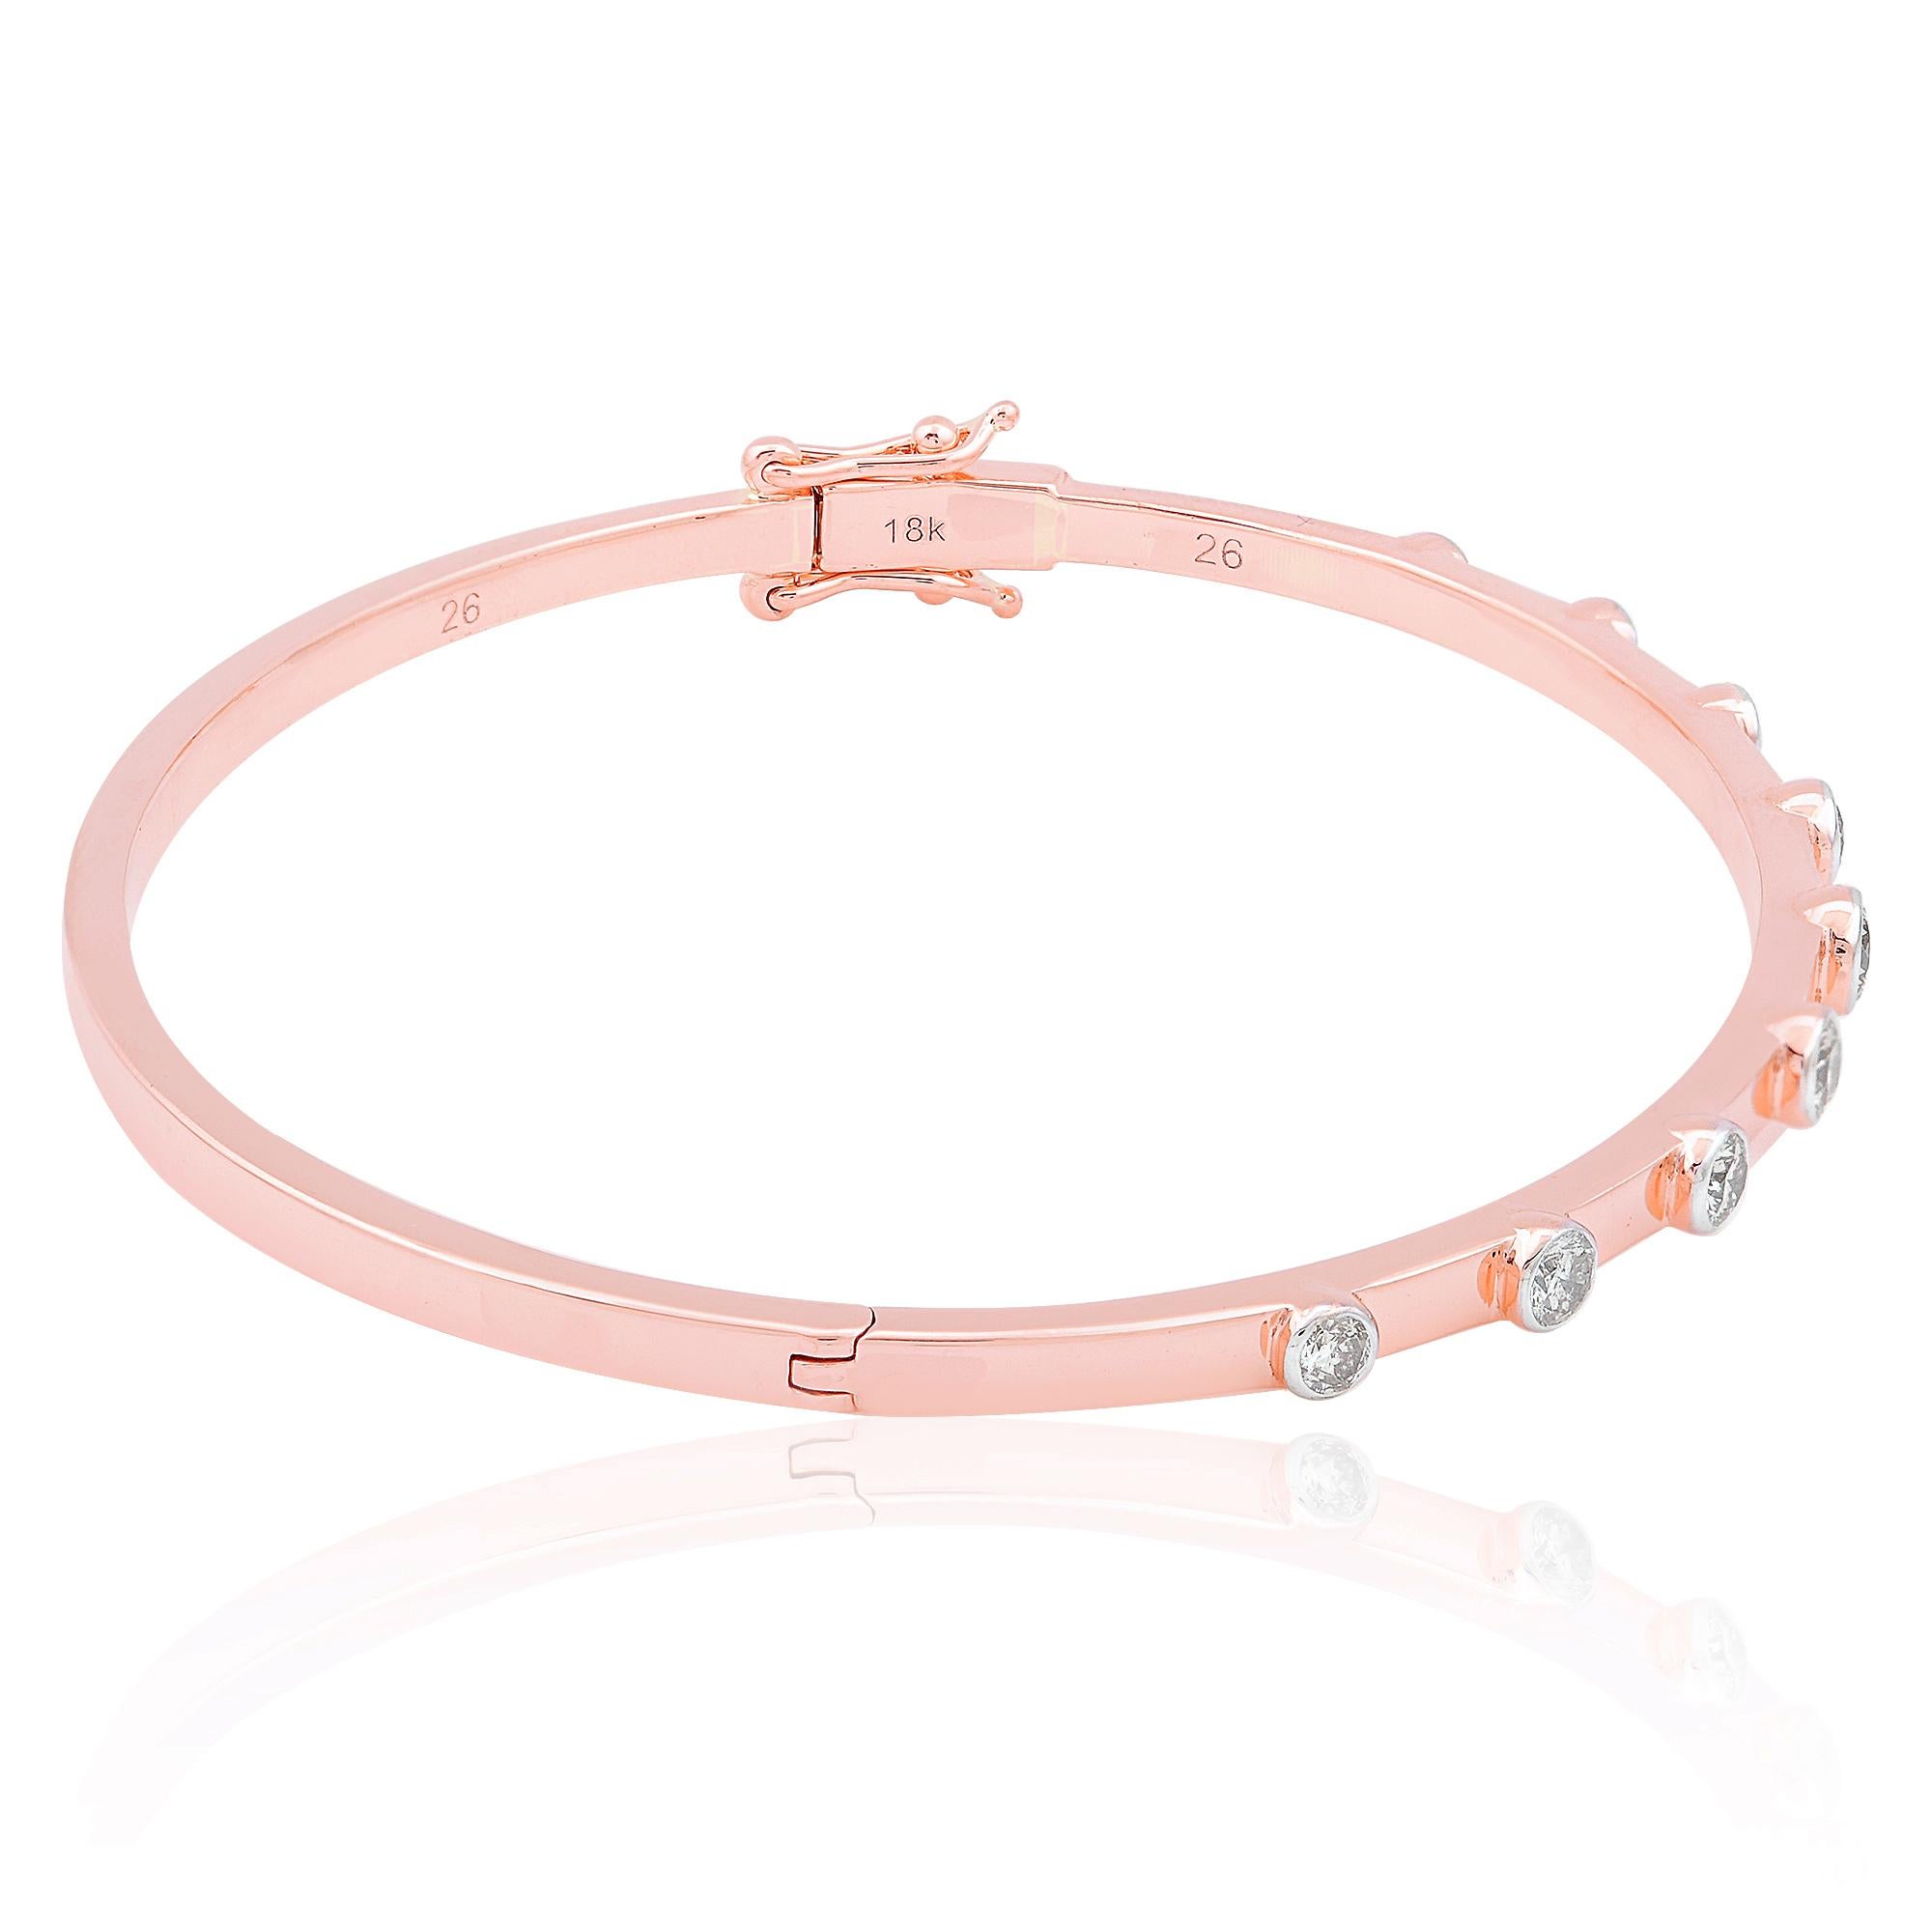 Immerse yourself in the enchanting beauty of this exquisite SI Clarity HI Color Round Diamond Bangle Bracelet, meticulously crafted in luxurious 18 Karat Rose Gold. A testament to refined elegance and timeless sophistication, this bracelet is sure